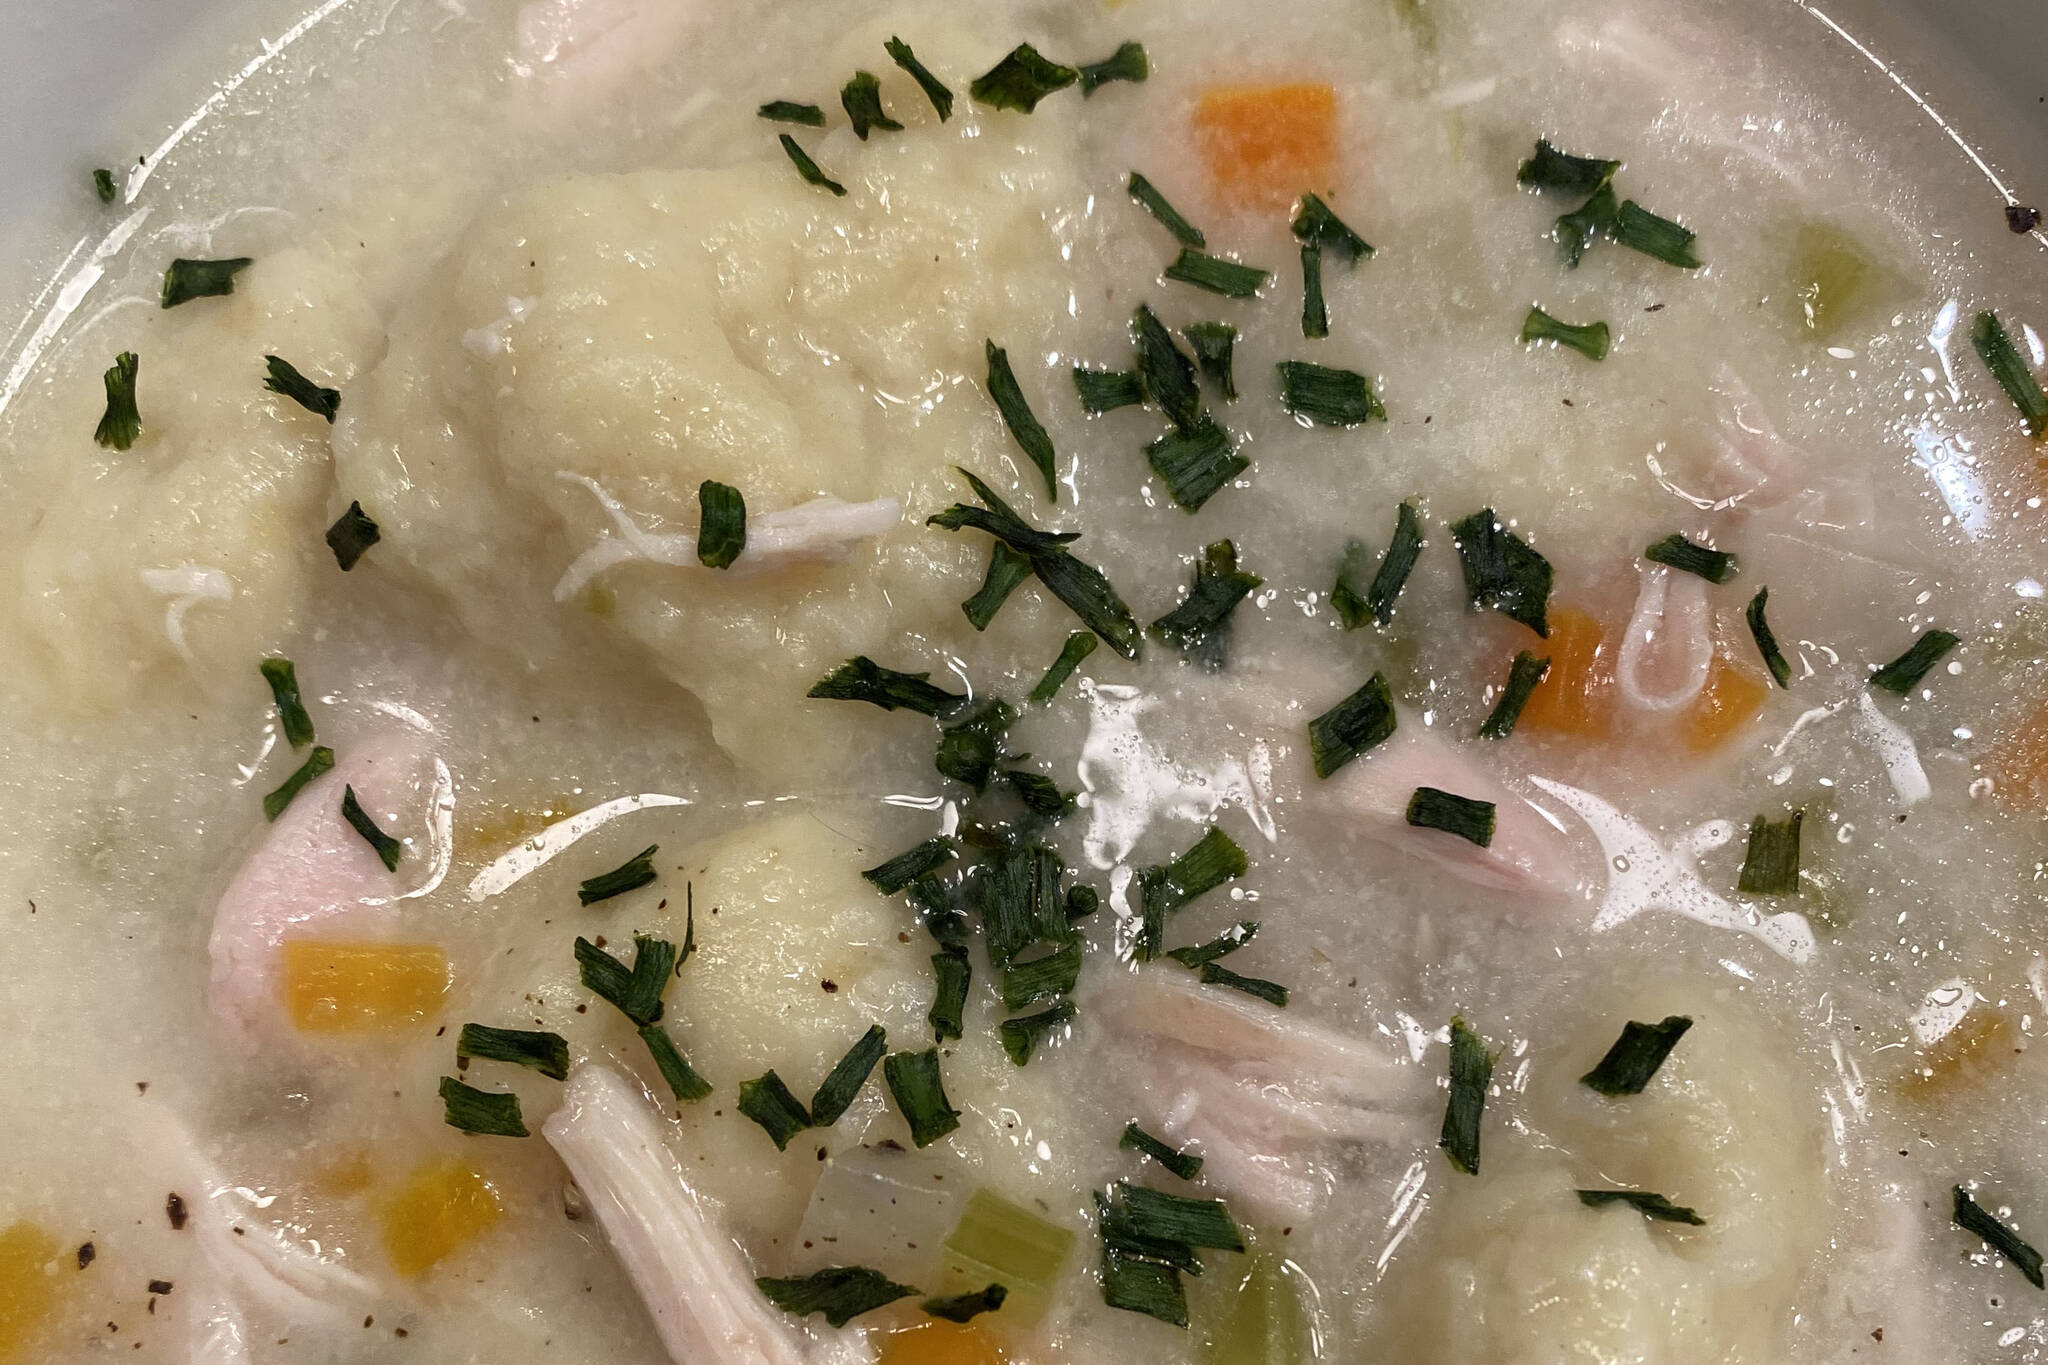 Onions, carrots and chicken broth are topped off with warm dumplings in this classic recipe. (Photo by Tressa Dale/Peninsula Clarion)